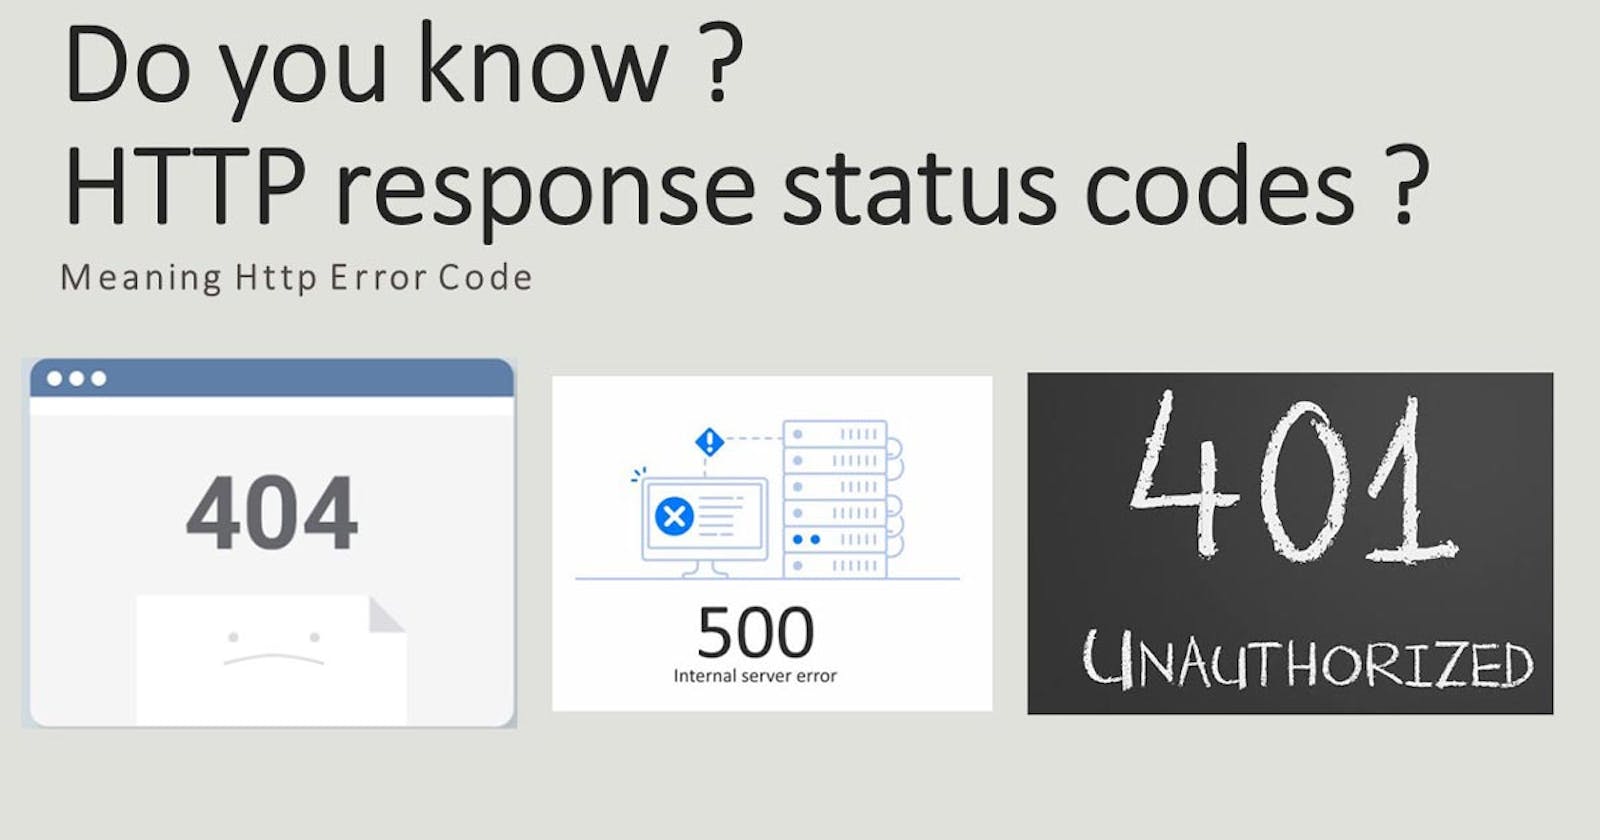 GET FAMILIAR WITH THESE IMPORTANT HTTP RESPONSE STATUS CODE